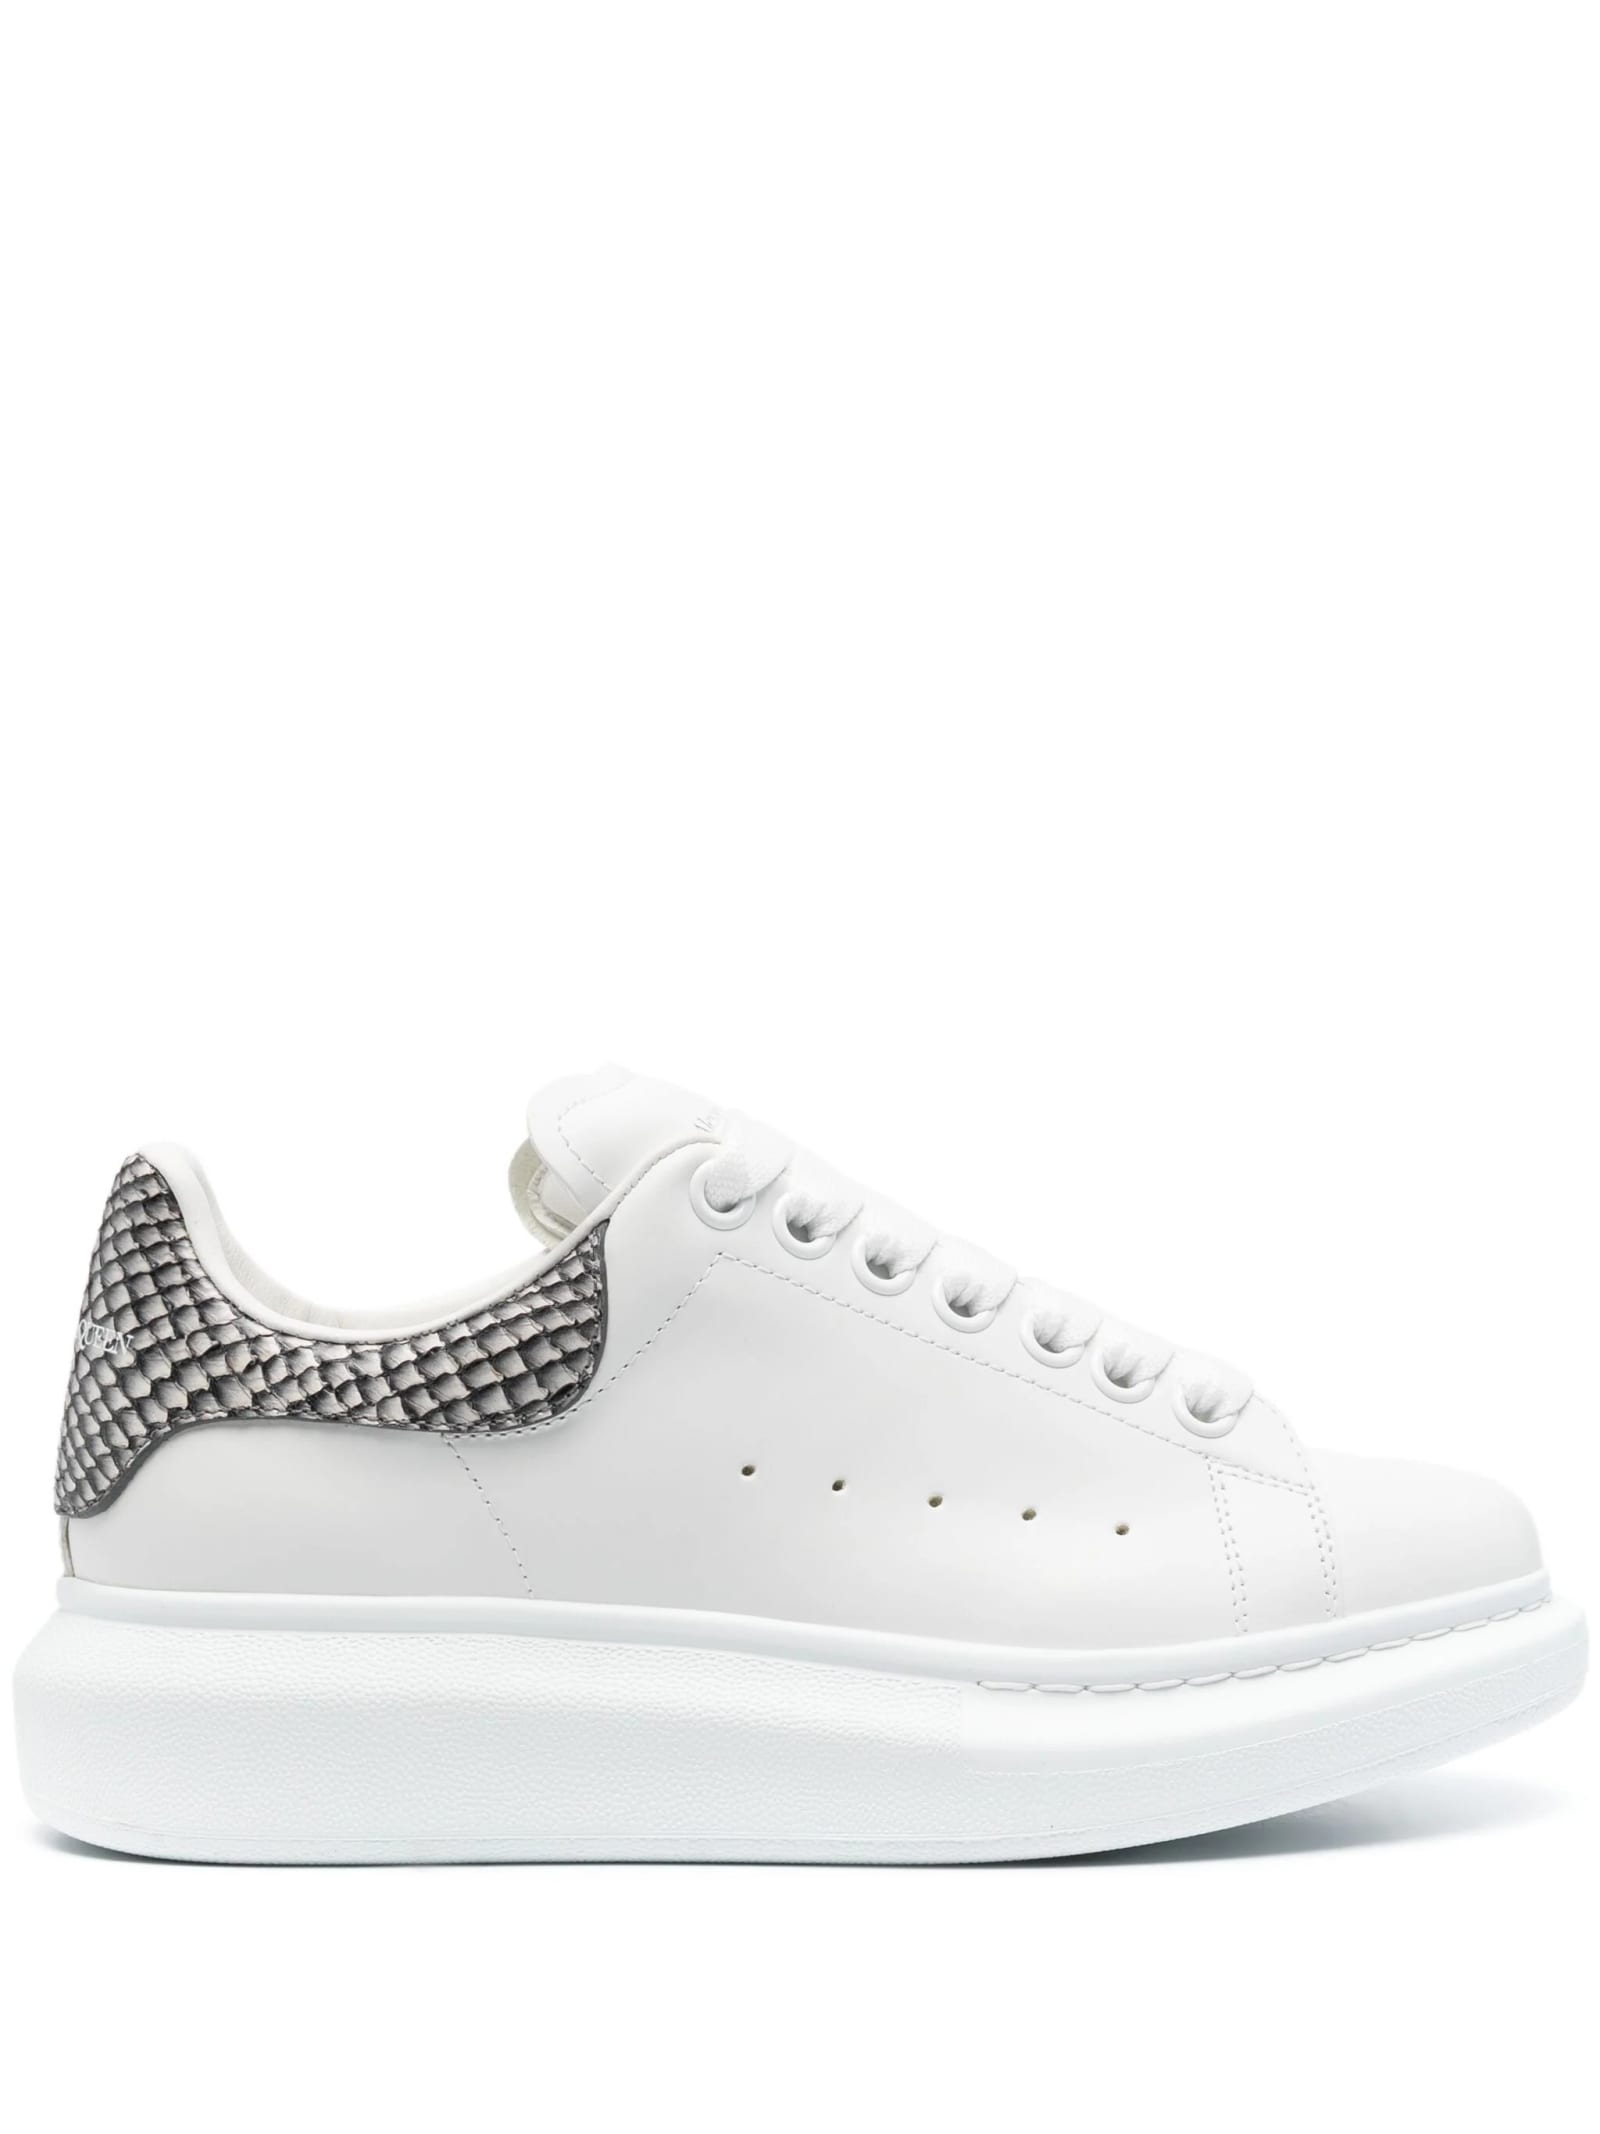 Shop Alexander Mcqueen White Oversized Sneakers With Snake Print Spoiler